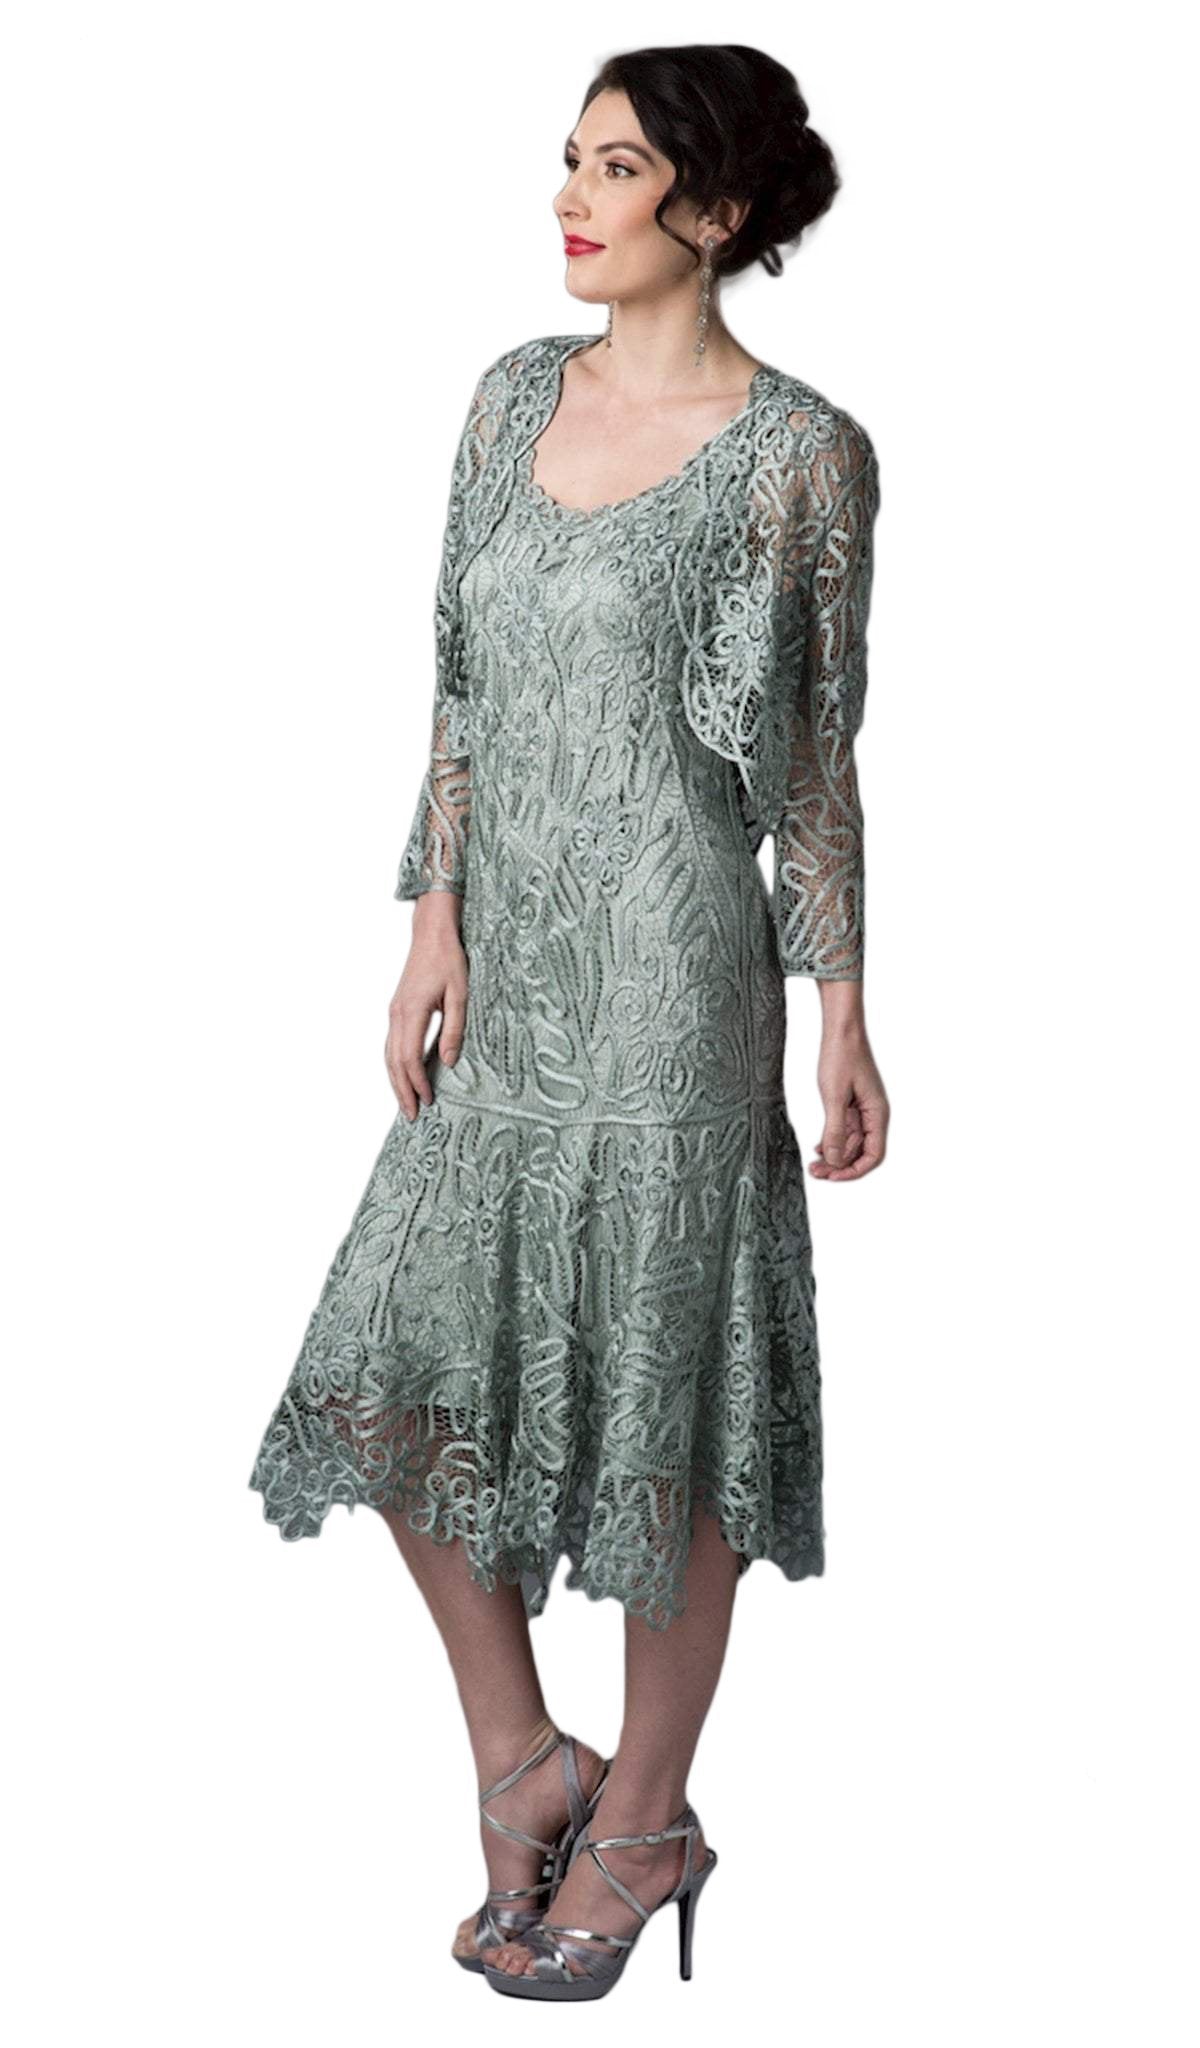 Soulmates - C9126SC Loose Blouse Beaded Embroidery Dress